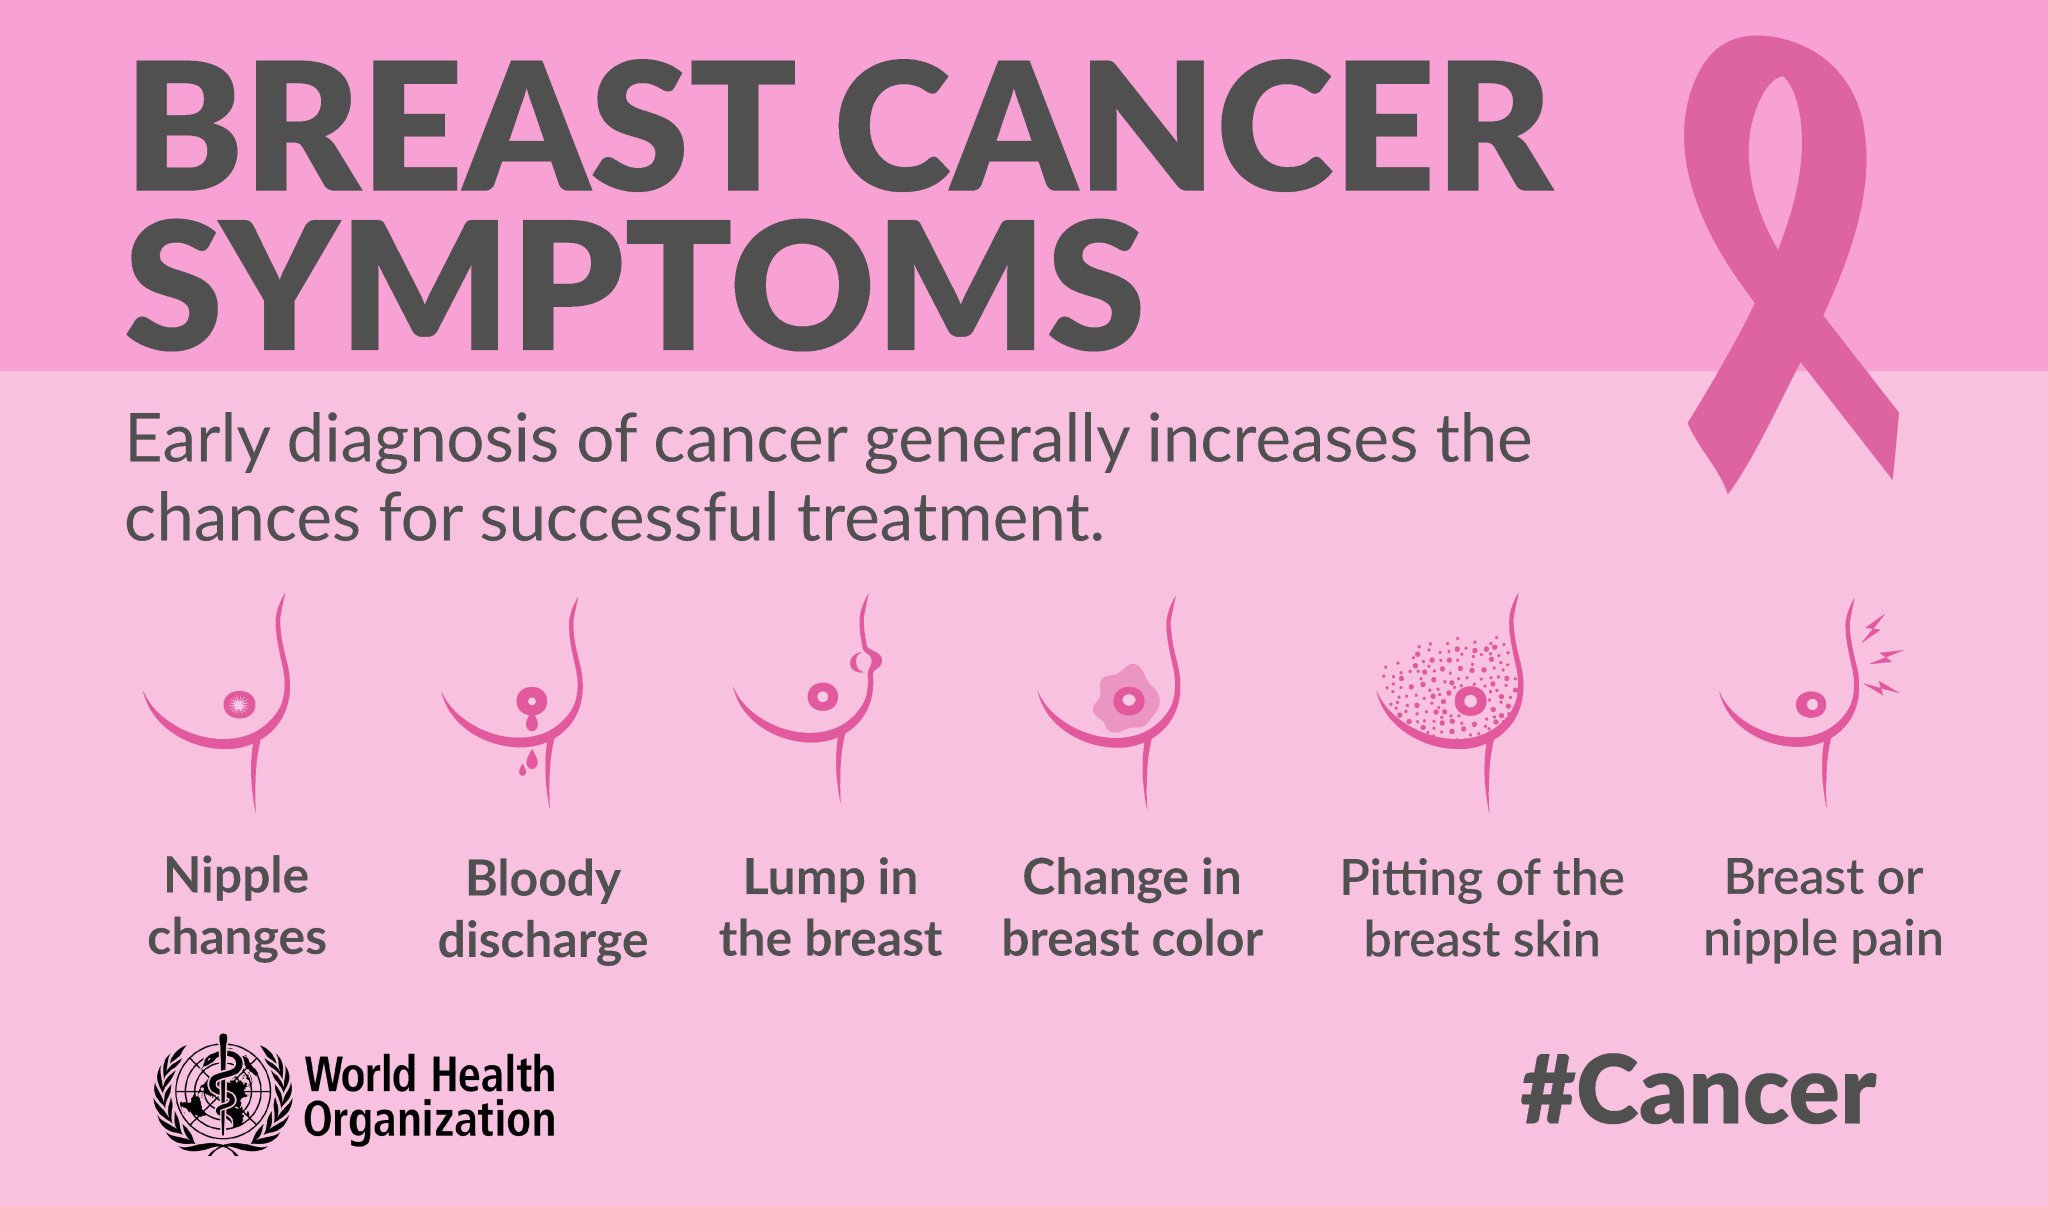 Philippines On Twitter Breastcancer Is The Most Frequent Cancer Among Women...